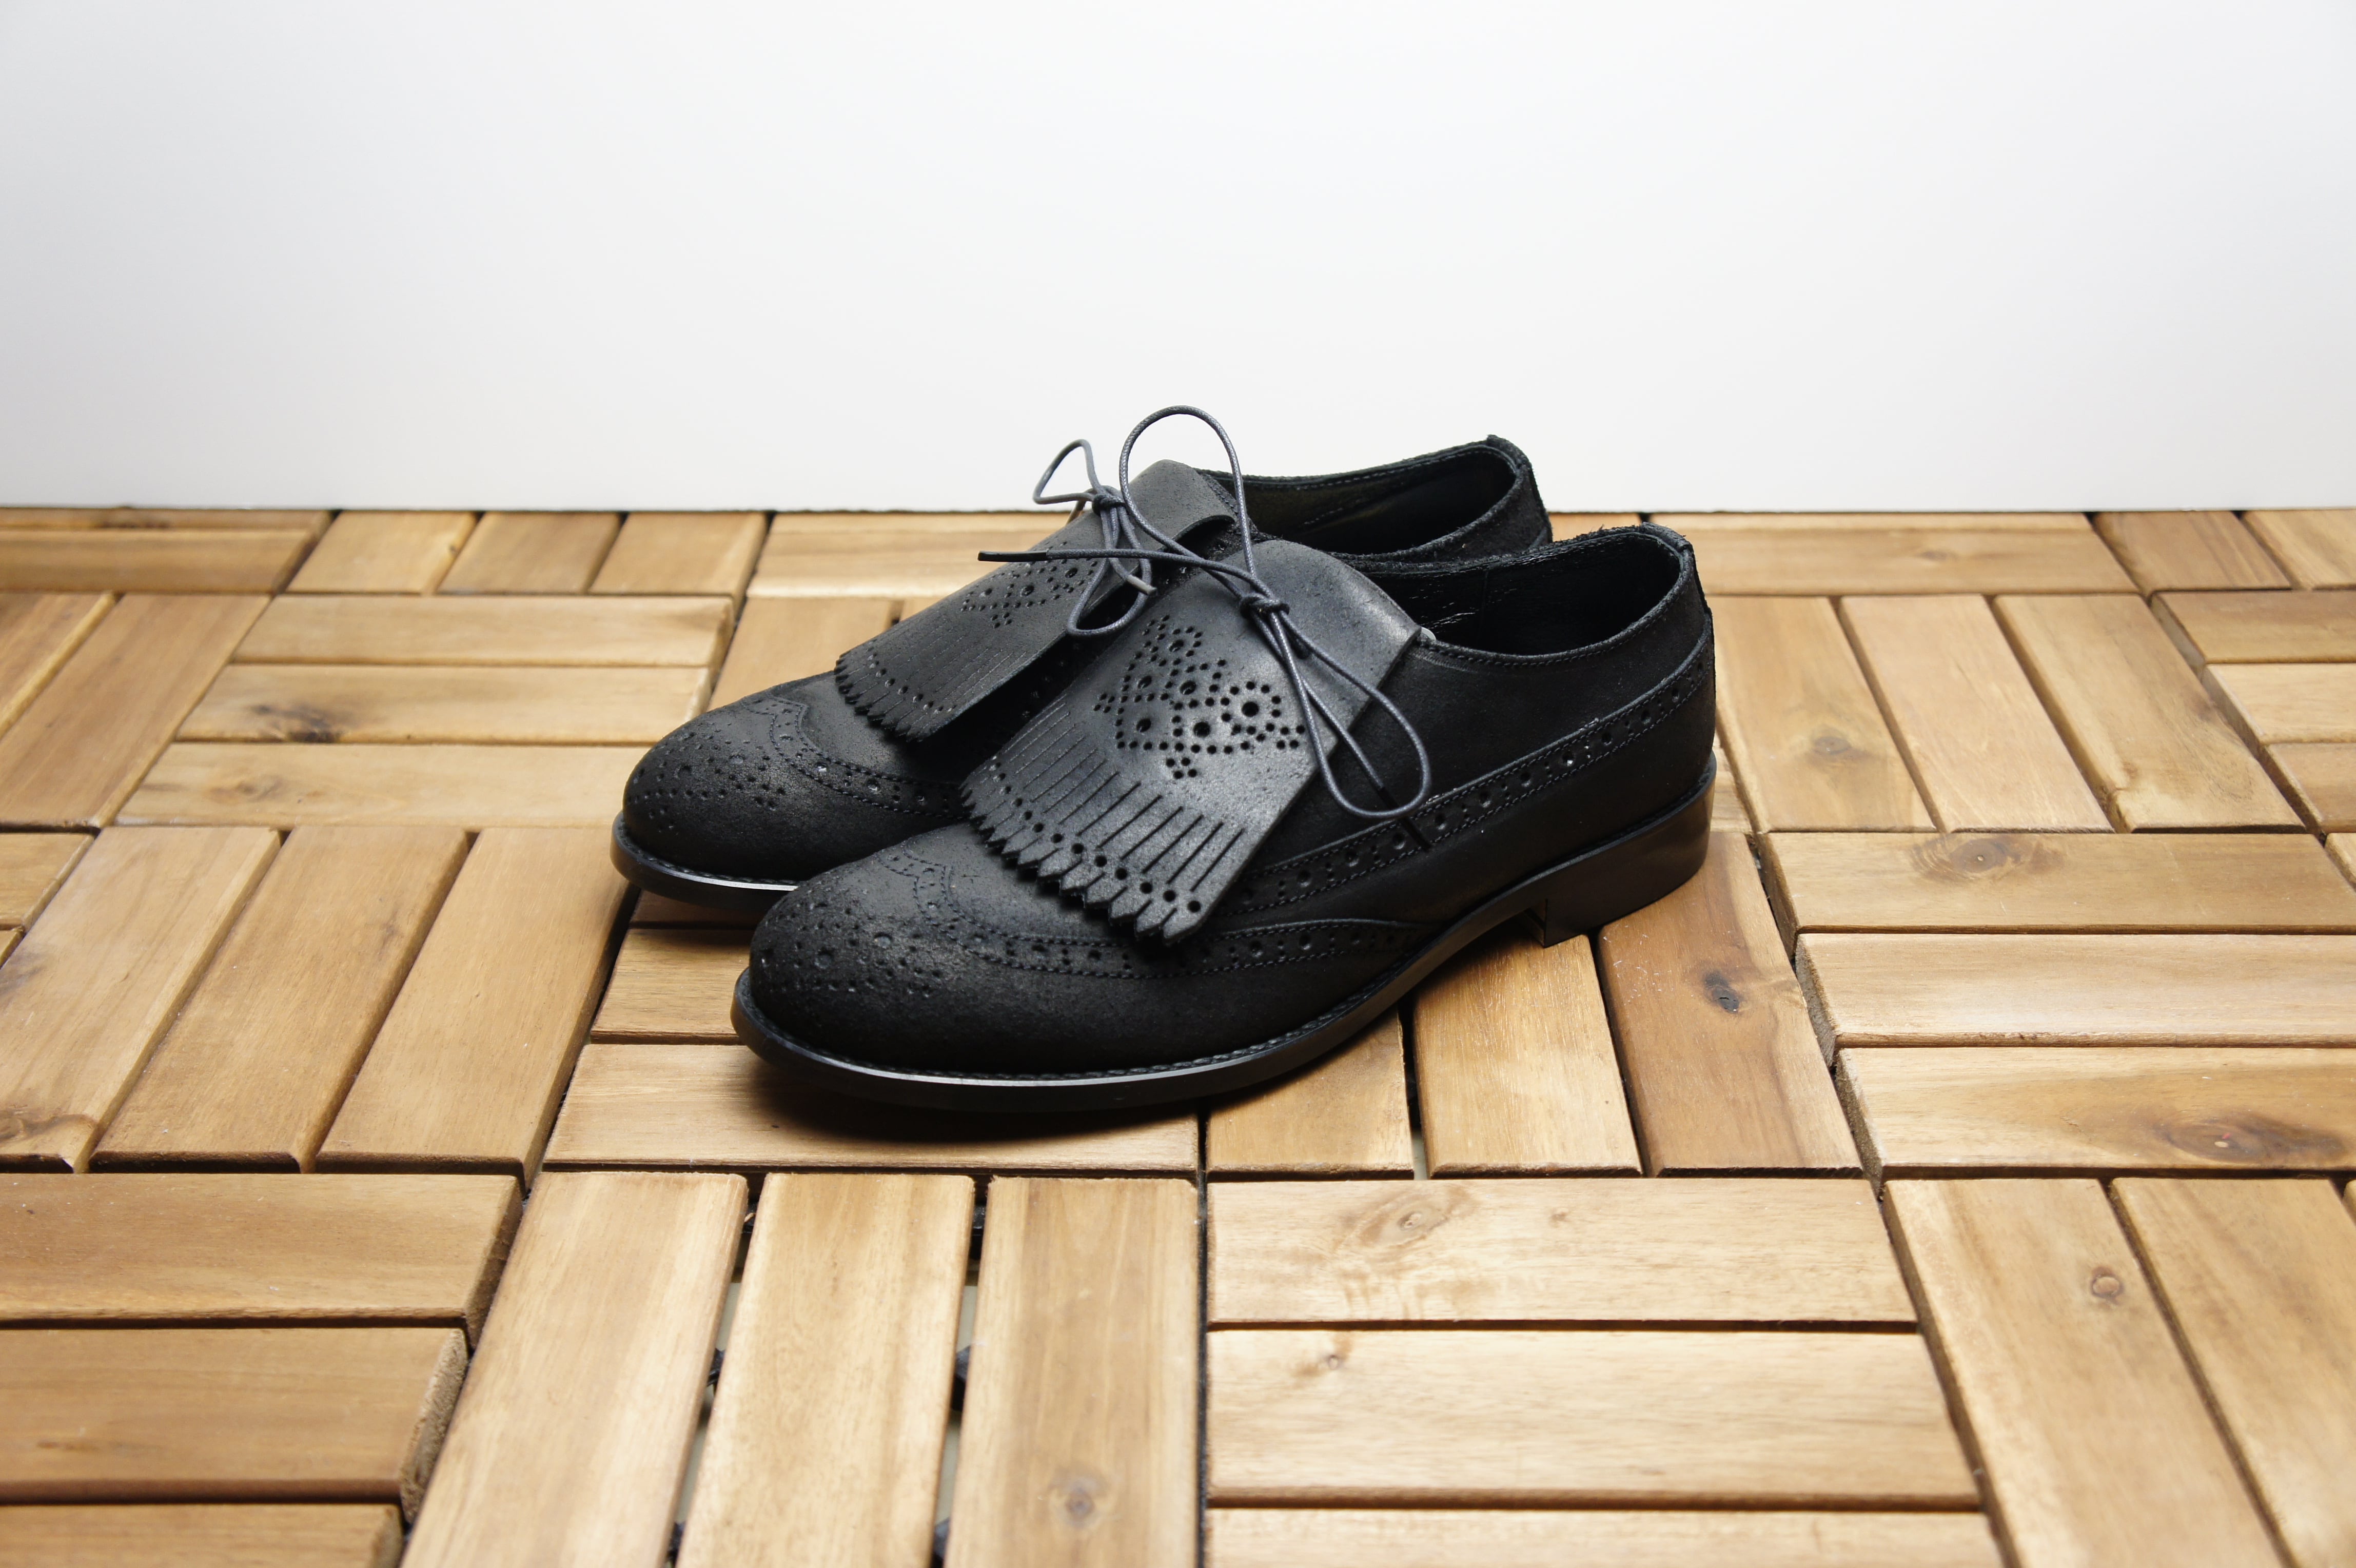 FULL BROGUE SHOES with KILTIE TONGUE (WAXED SUEDE)